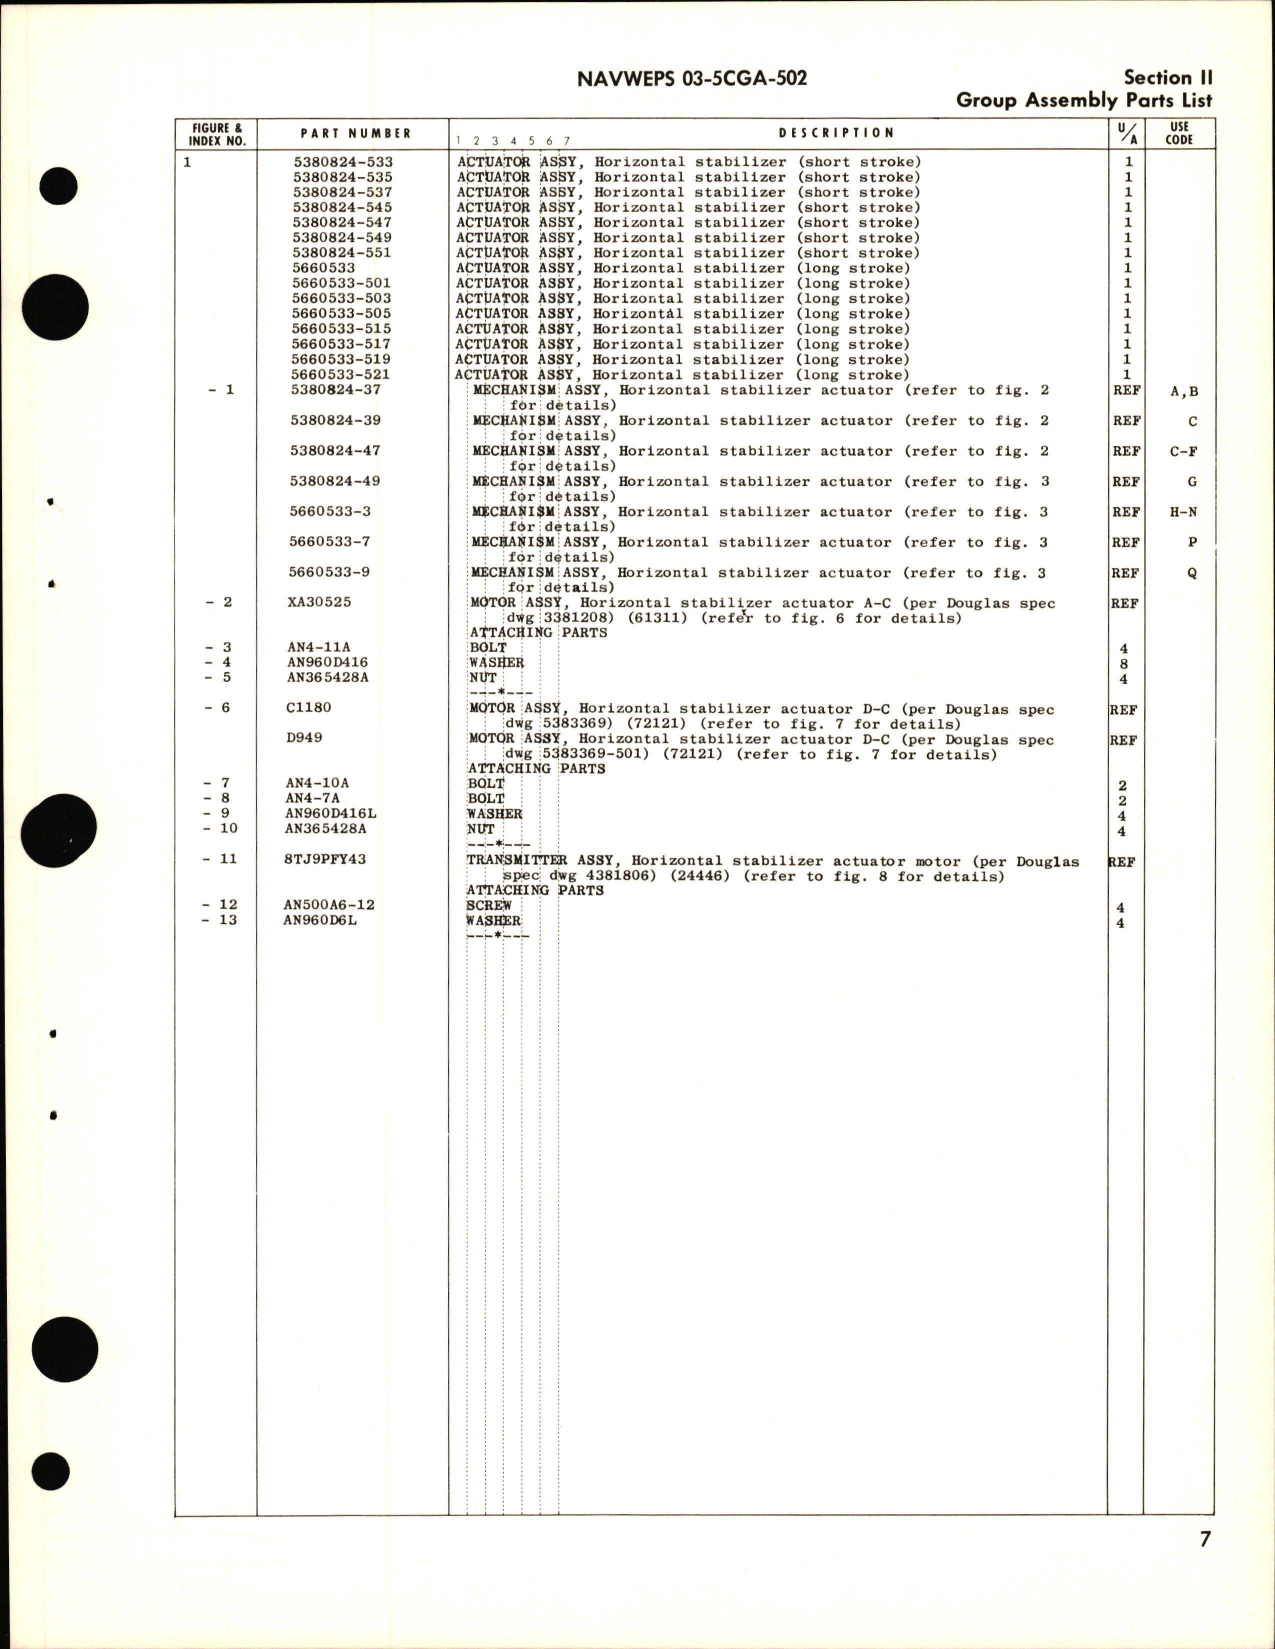 Sample page 9 from AirCorps Library document: Parts Breakdown for Horizontal Stabilizer Actuator - 5380824 and 5660533 Series 